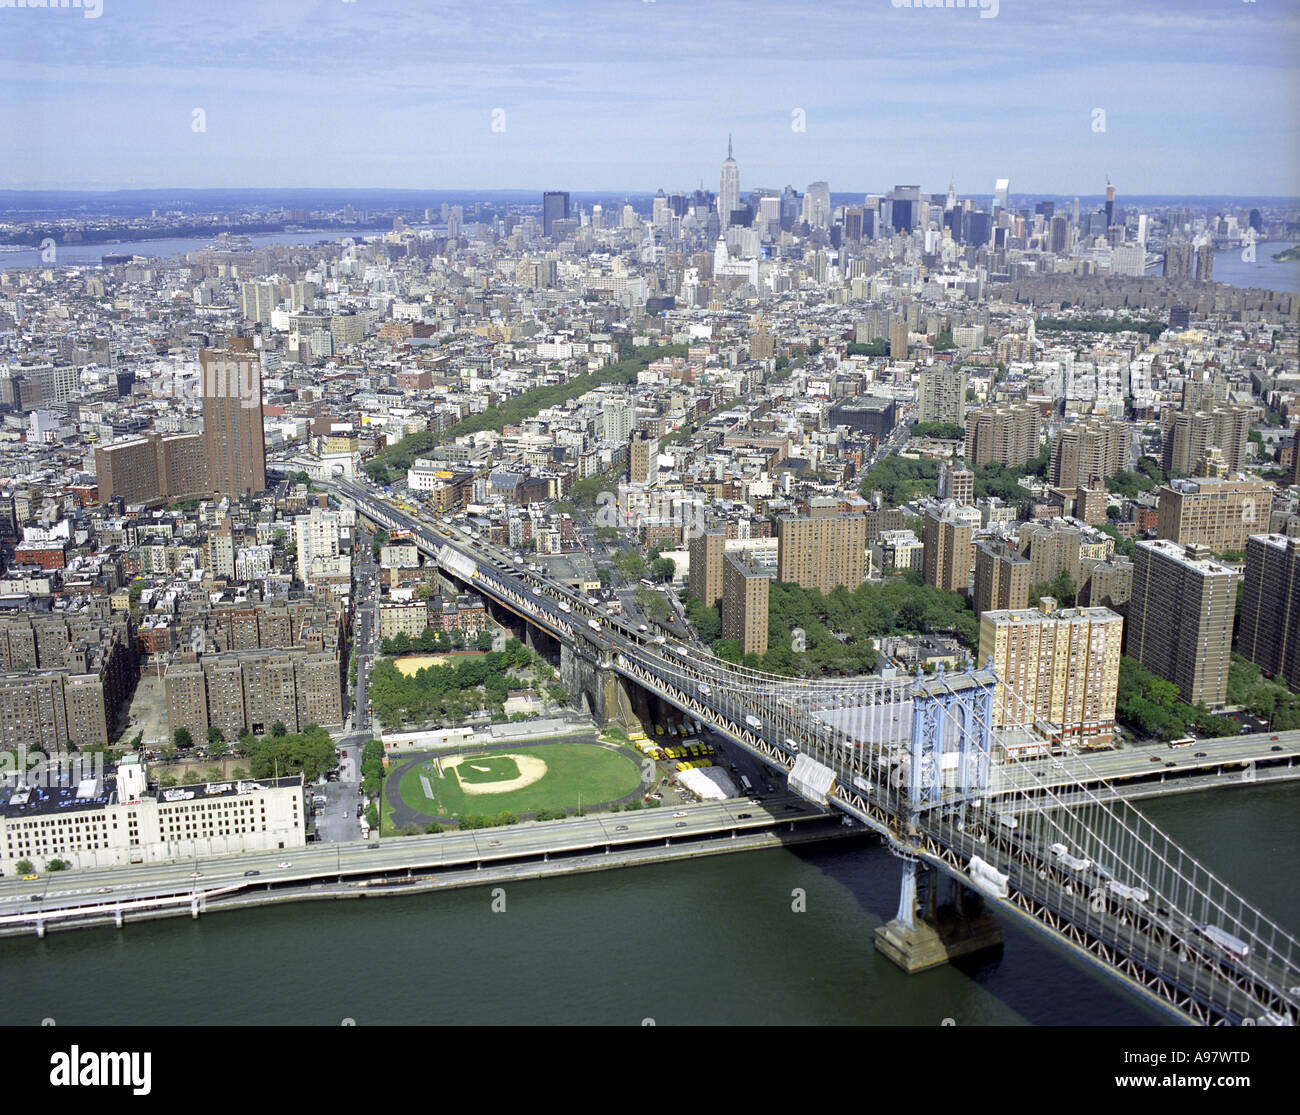 Aerial view of the Manhattan Bridge, located on the East River, New York City, U.S.A. Stock Photo